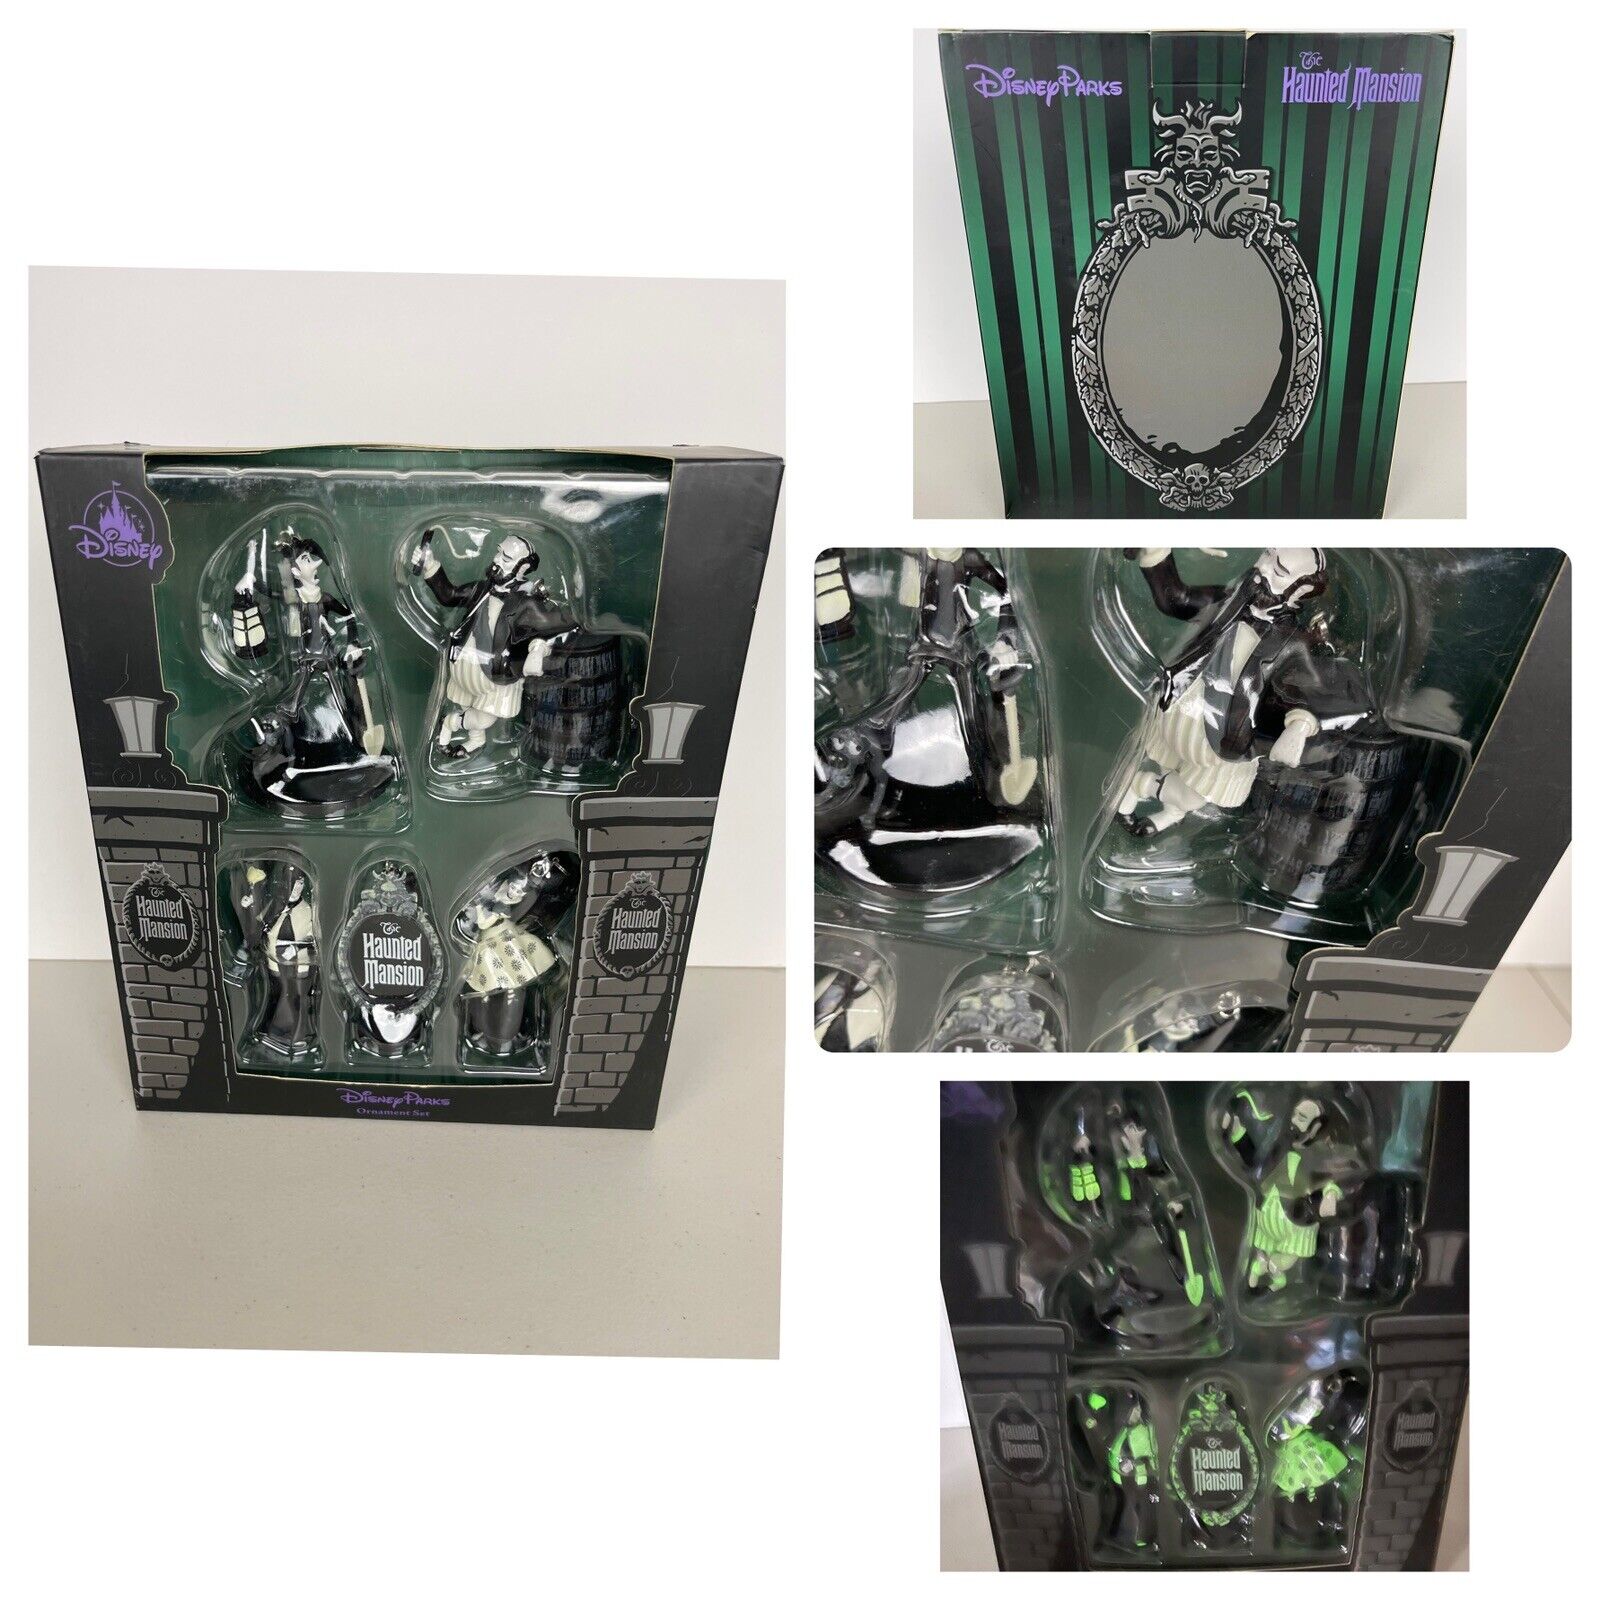 Disney The Haunted Mansion Glow-in-the-Dark Ornament Set Disney Exclusive